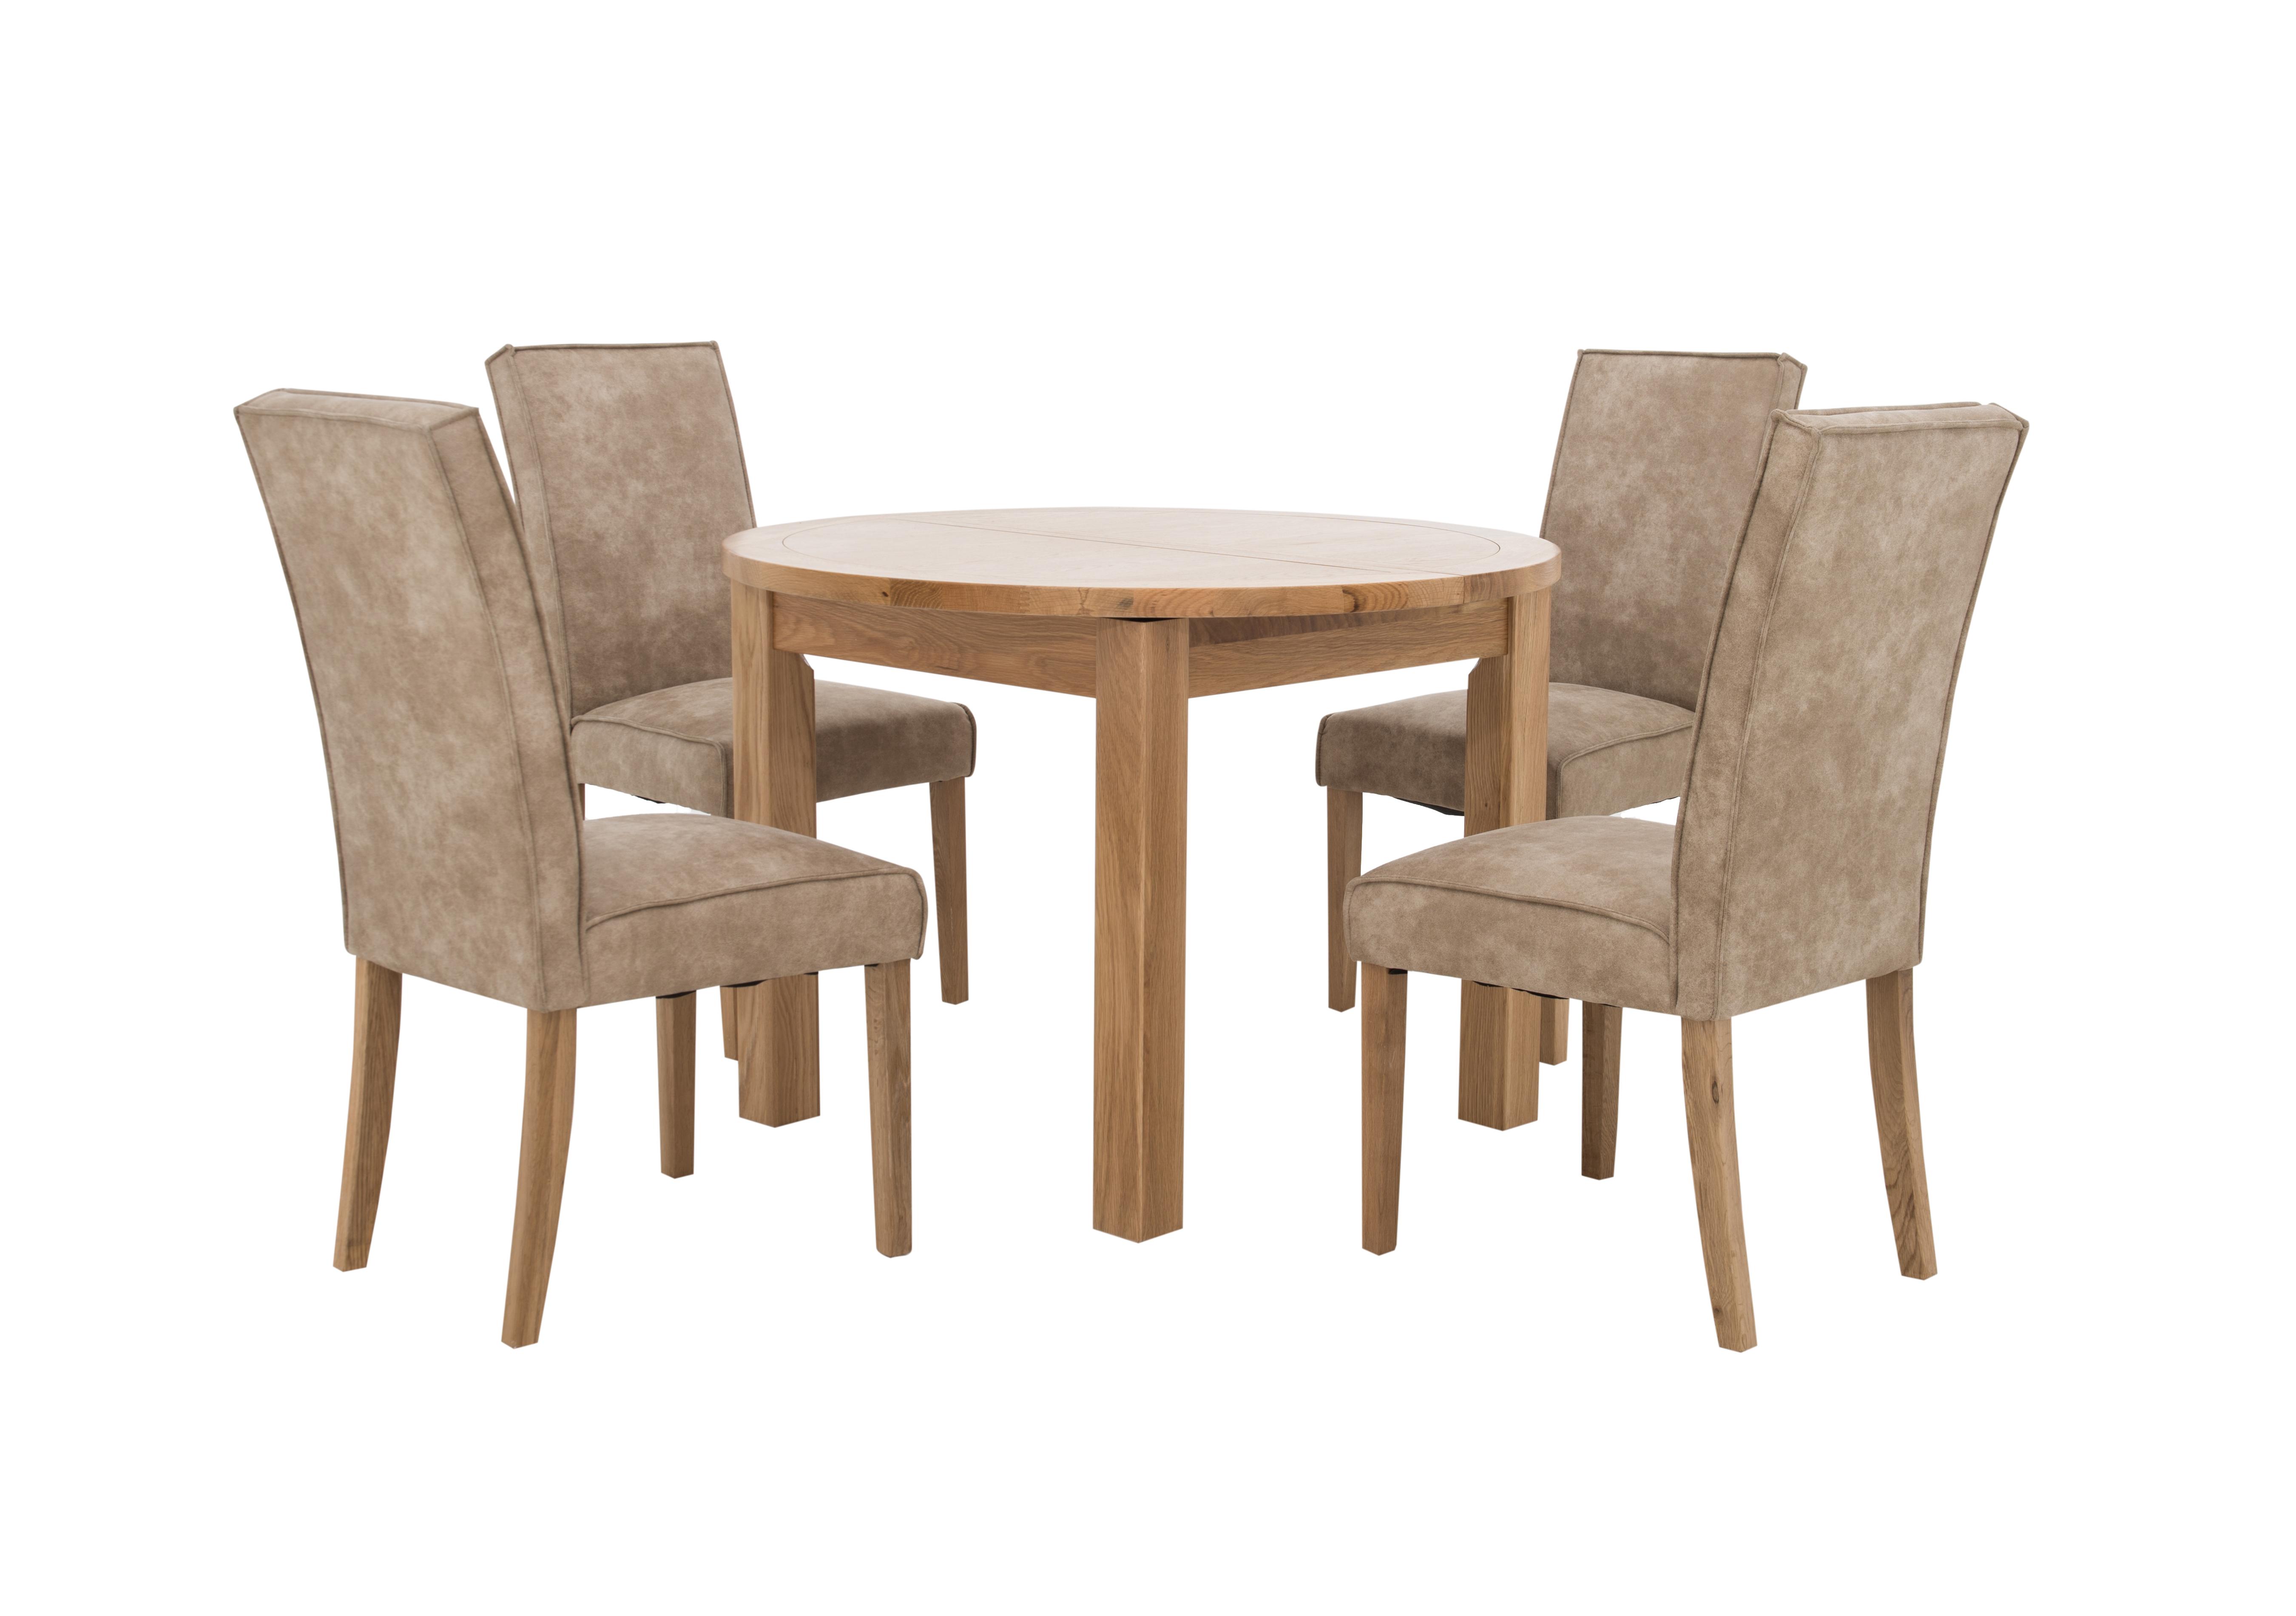 California Round Solid Oak Extending Dining Table and 4 Faux Suede Dining Chairs in  on Furniture Village